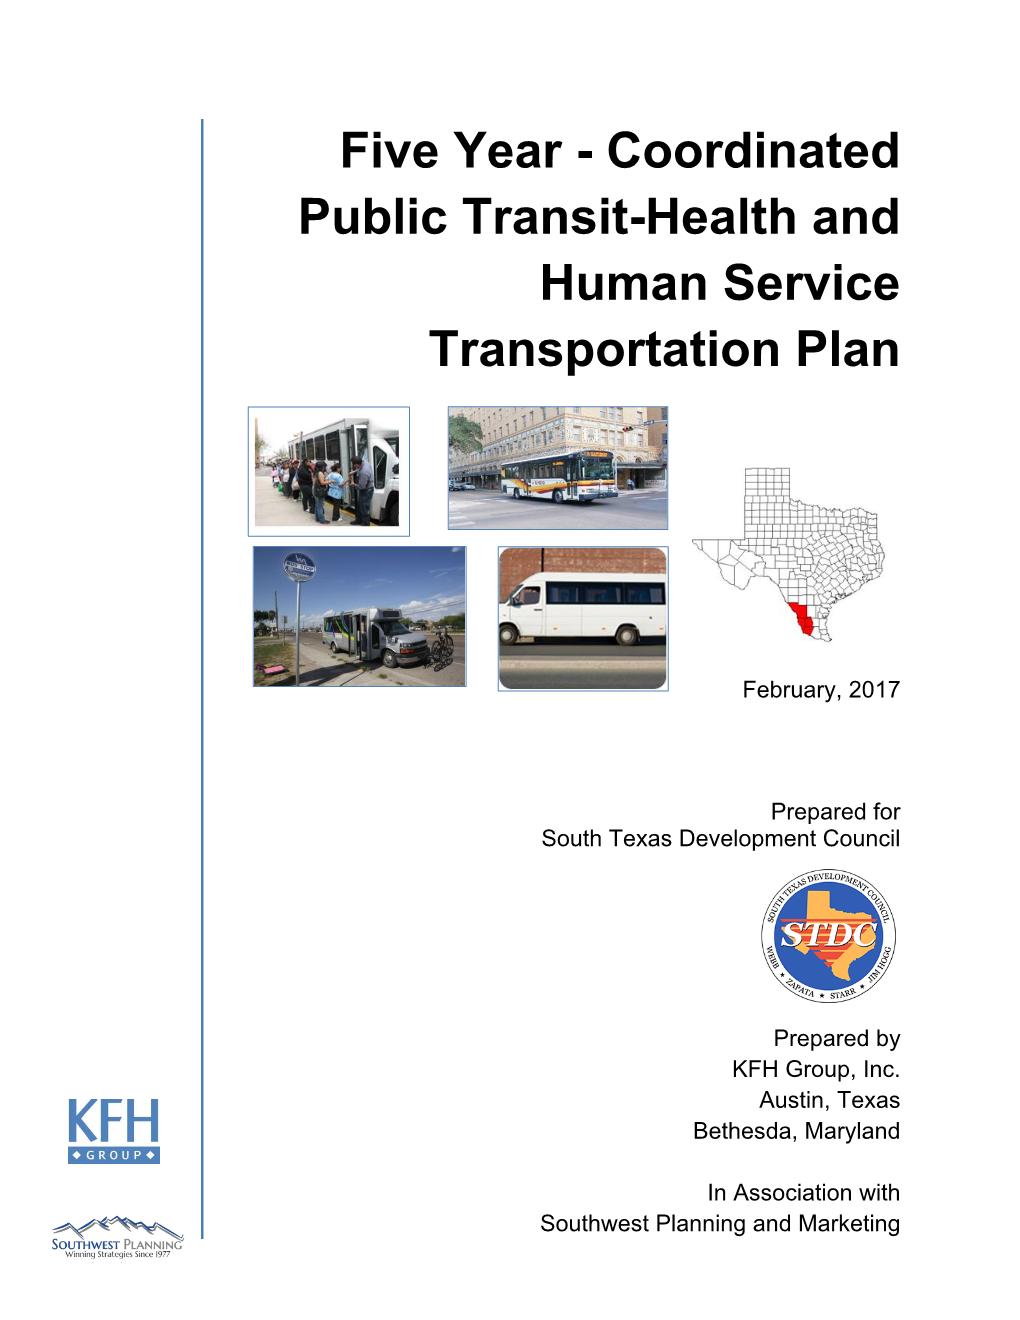 Updated Five-Year Coordinated Public Transit-Health and Human